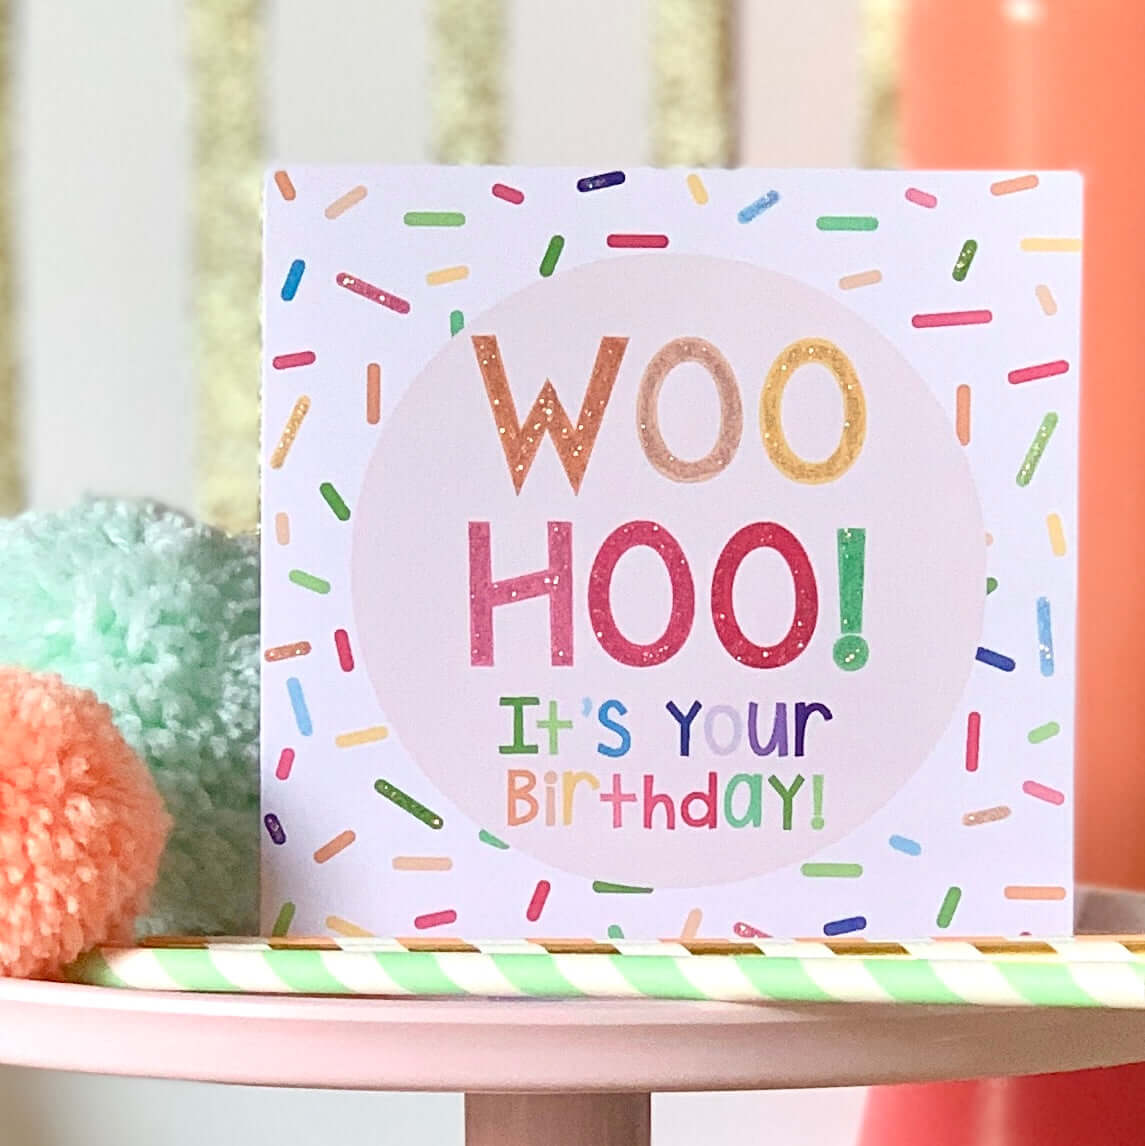 Glittery Birthday Card with Hundreds and Thousands | Woo Hoo! It's Your Birthday Card